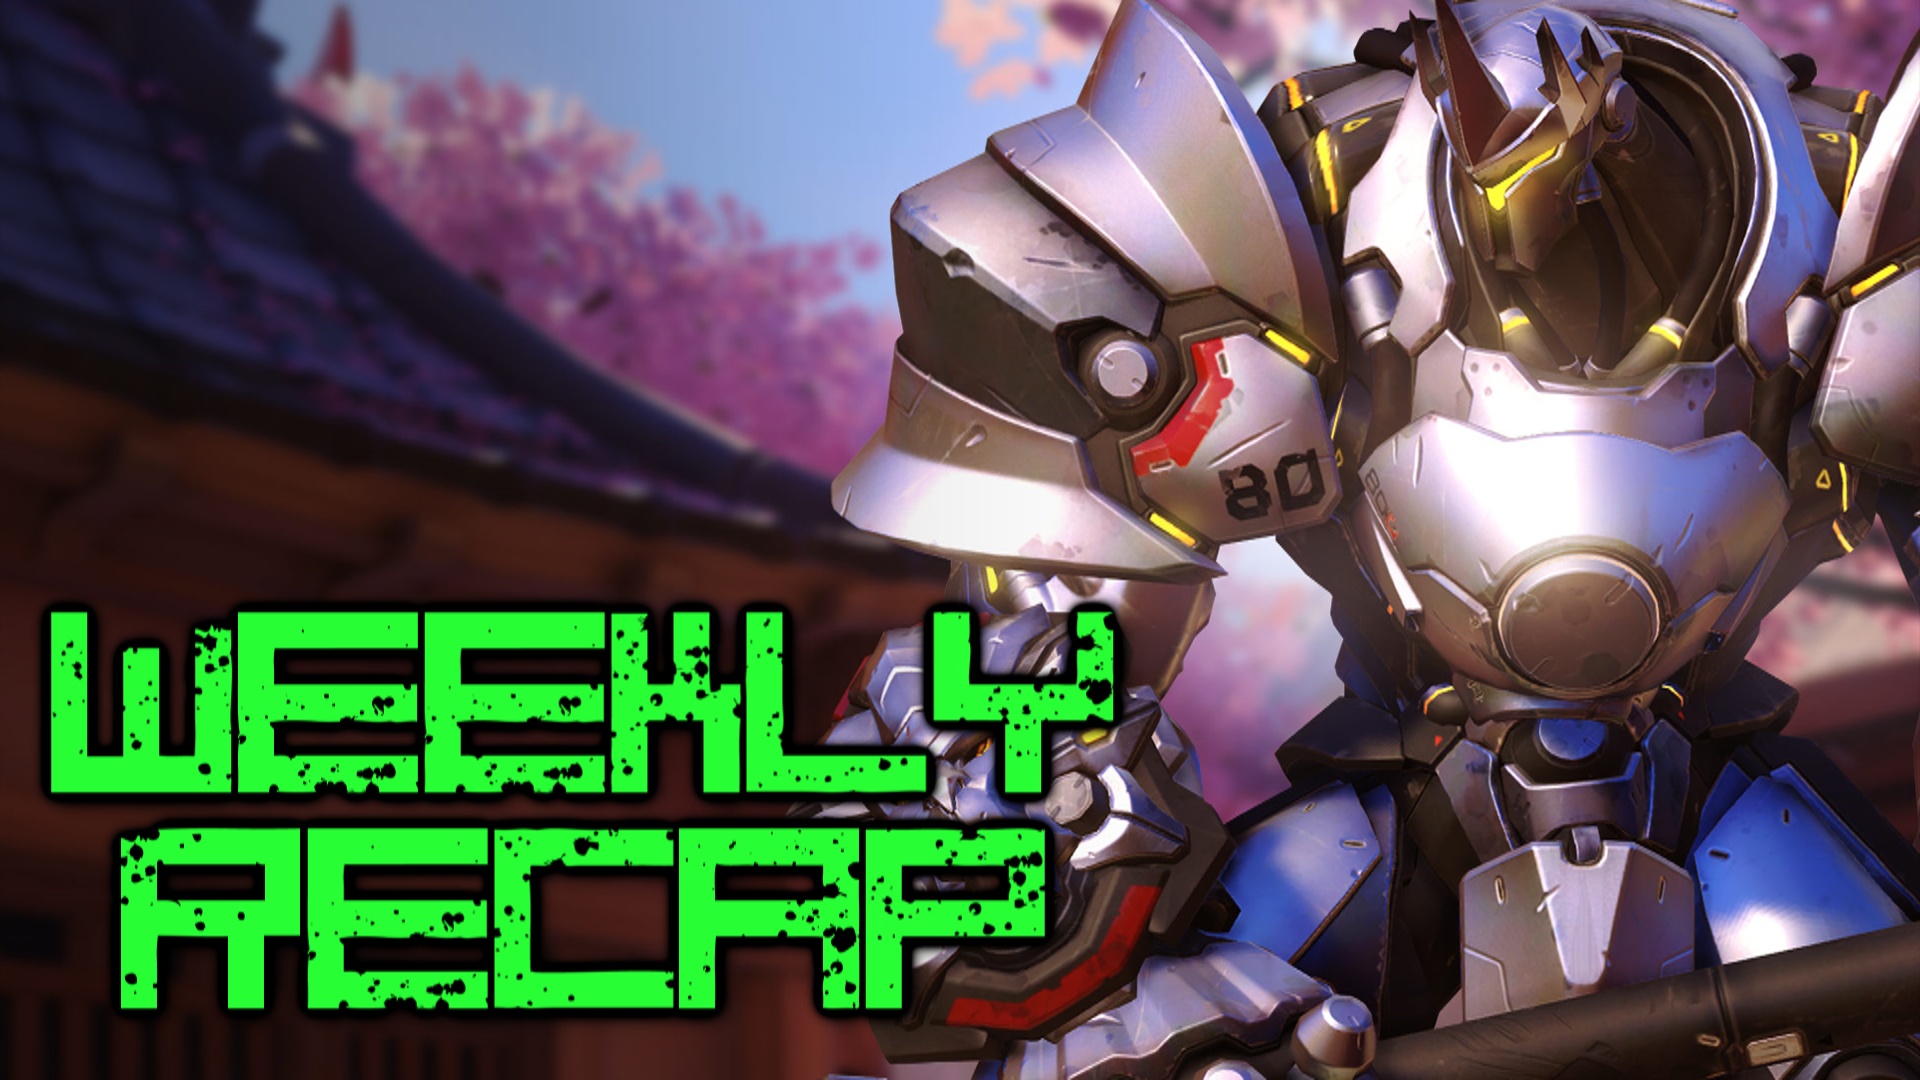 MMOHuts Weekly Recap #280 Mar. 7th - Warframe, Overwatch, EoS & More!